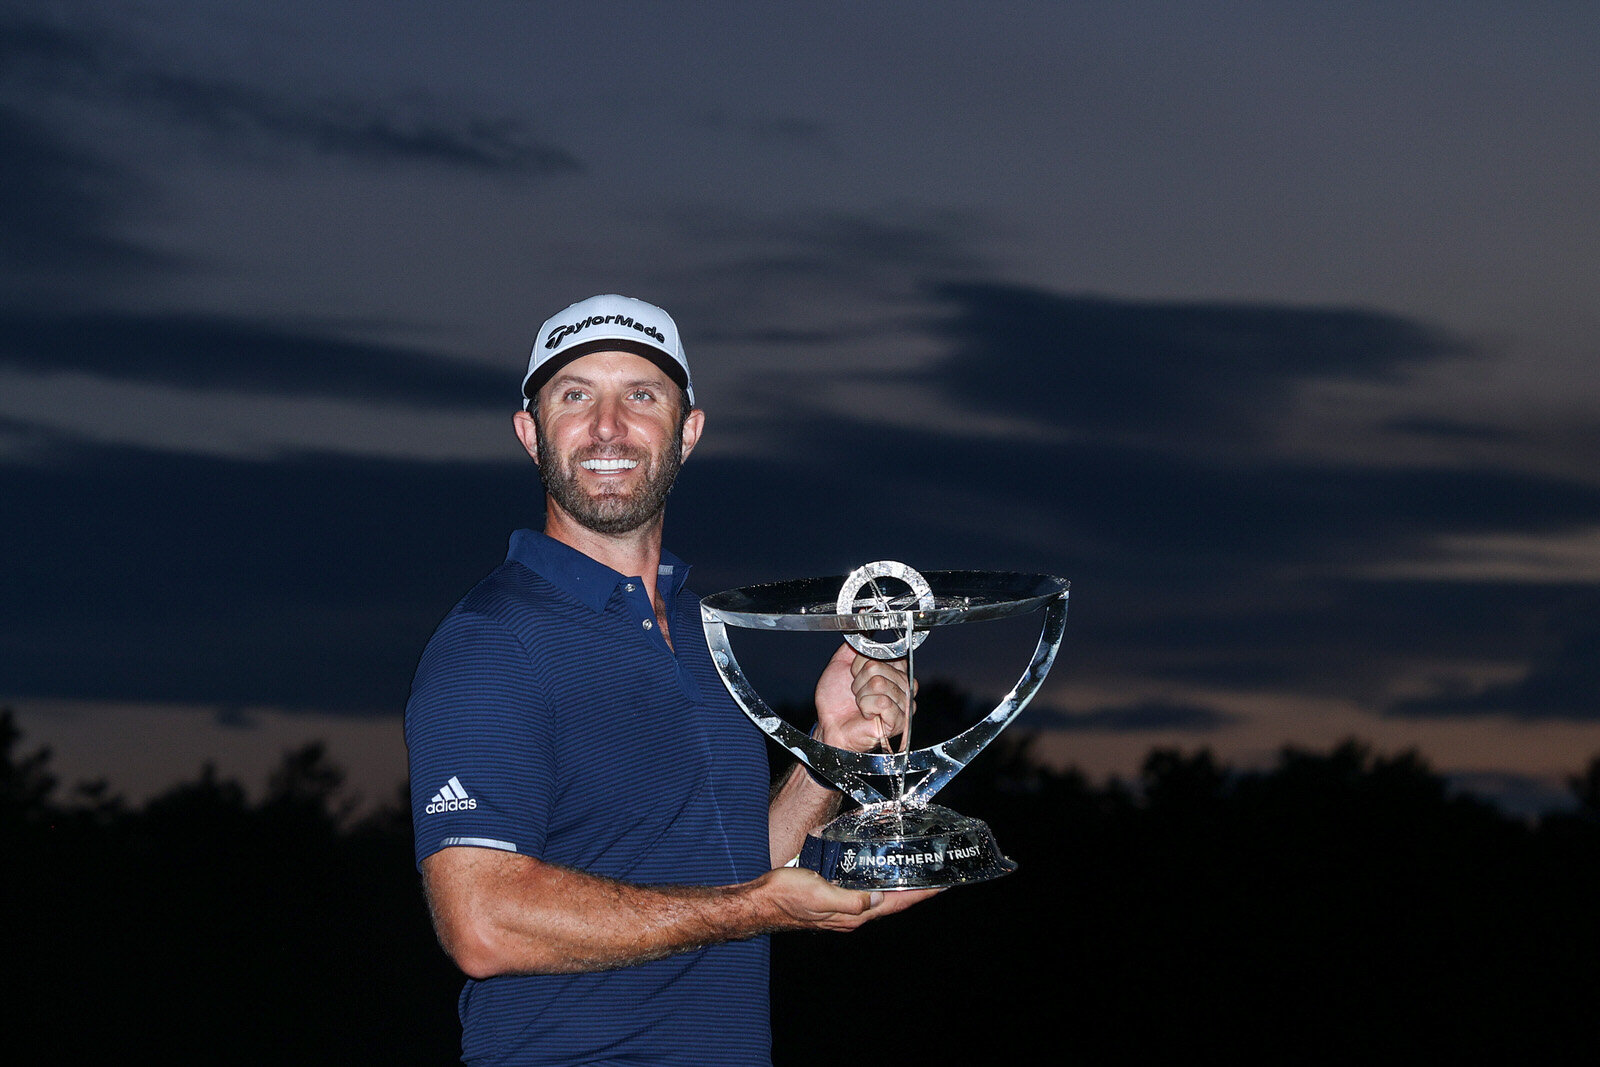  NORTON, MASSACHUSETTS - AUGUST 23: Dustin Johnson of the United States celebrates with the trophy after going 30-under par to win during the final round of The Northern Trust at TPC Boston on August 23, 2020 in Norton, Massachusetts. (Photo by Rob C